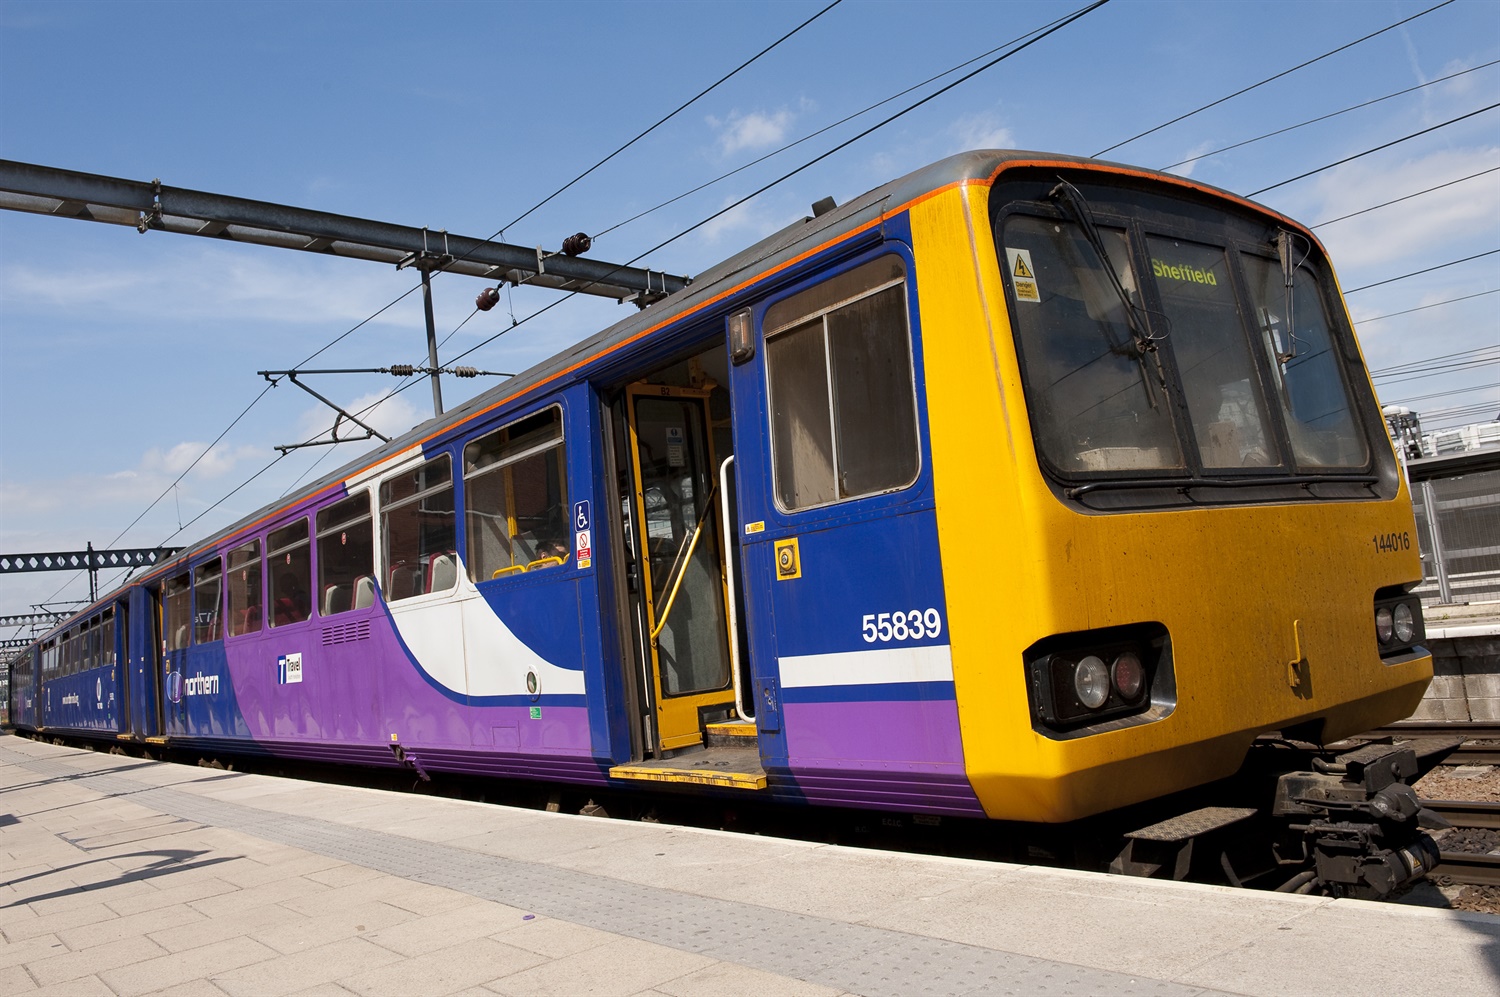 Upgraded Pacers for use past 2020 on track for April launch 